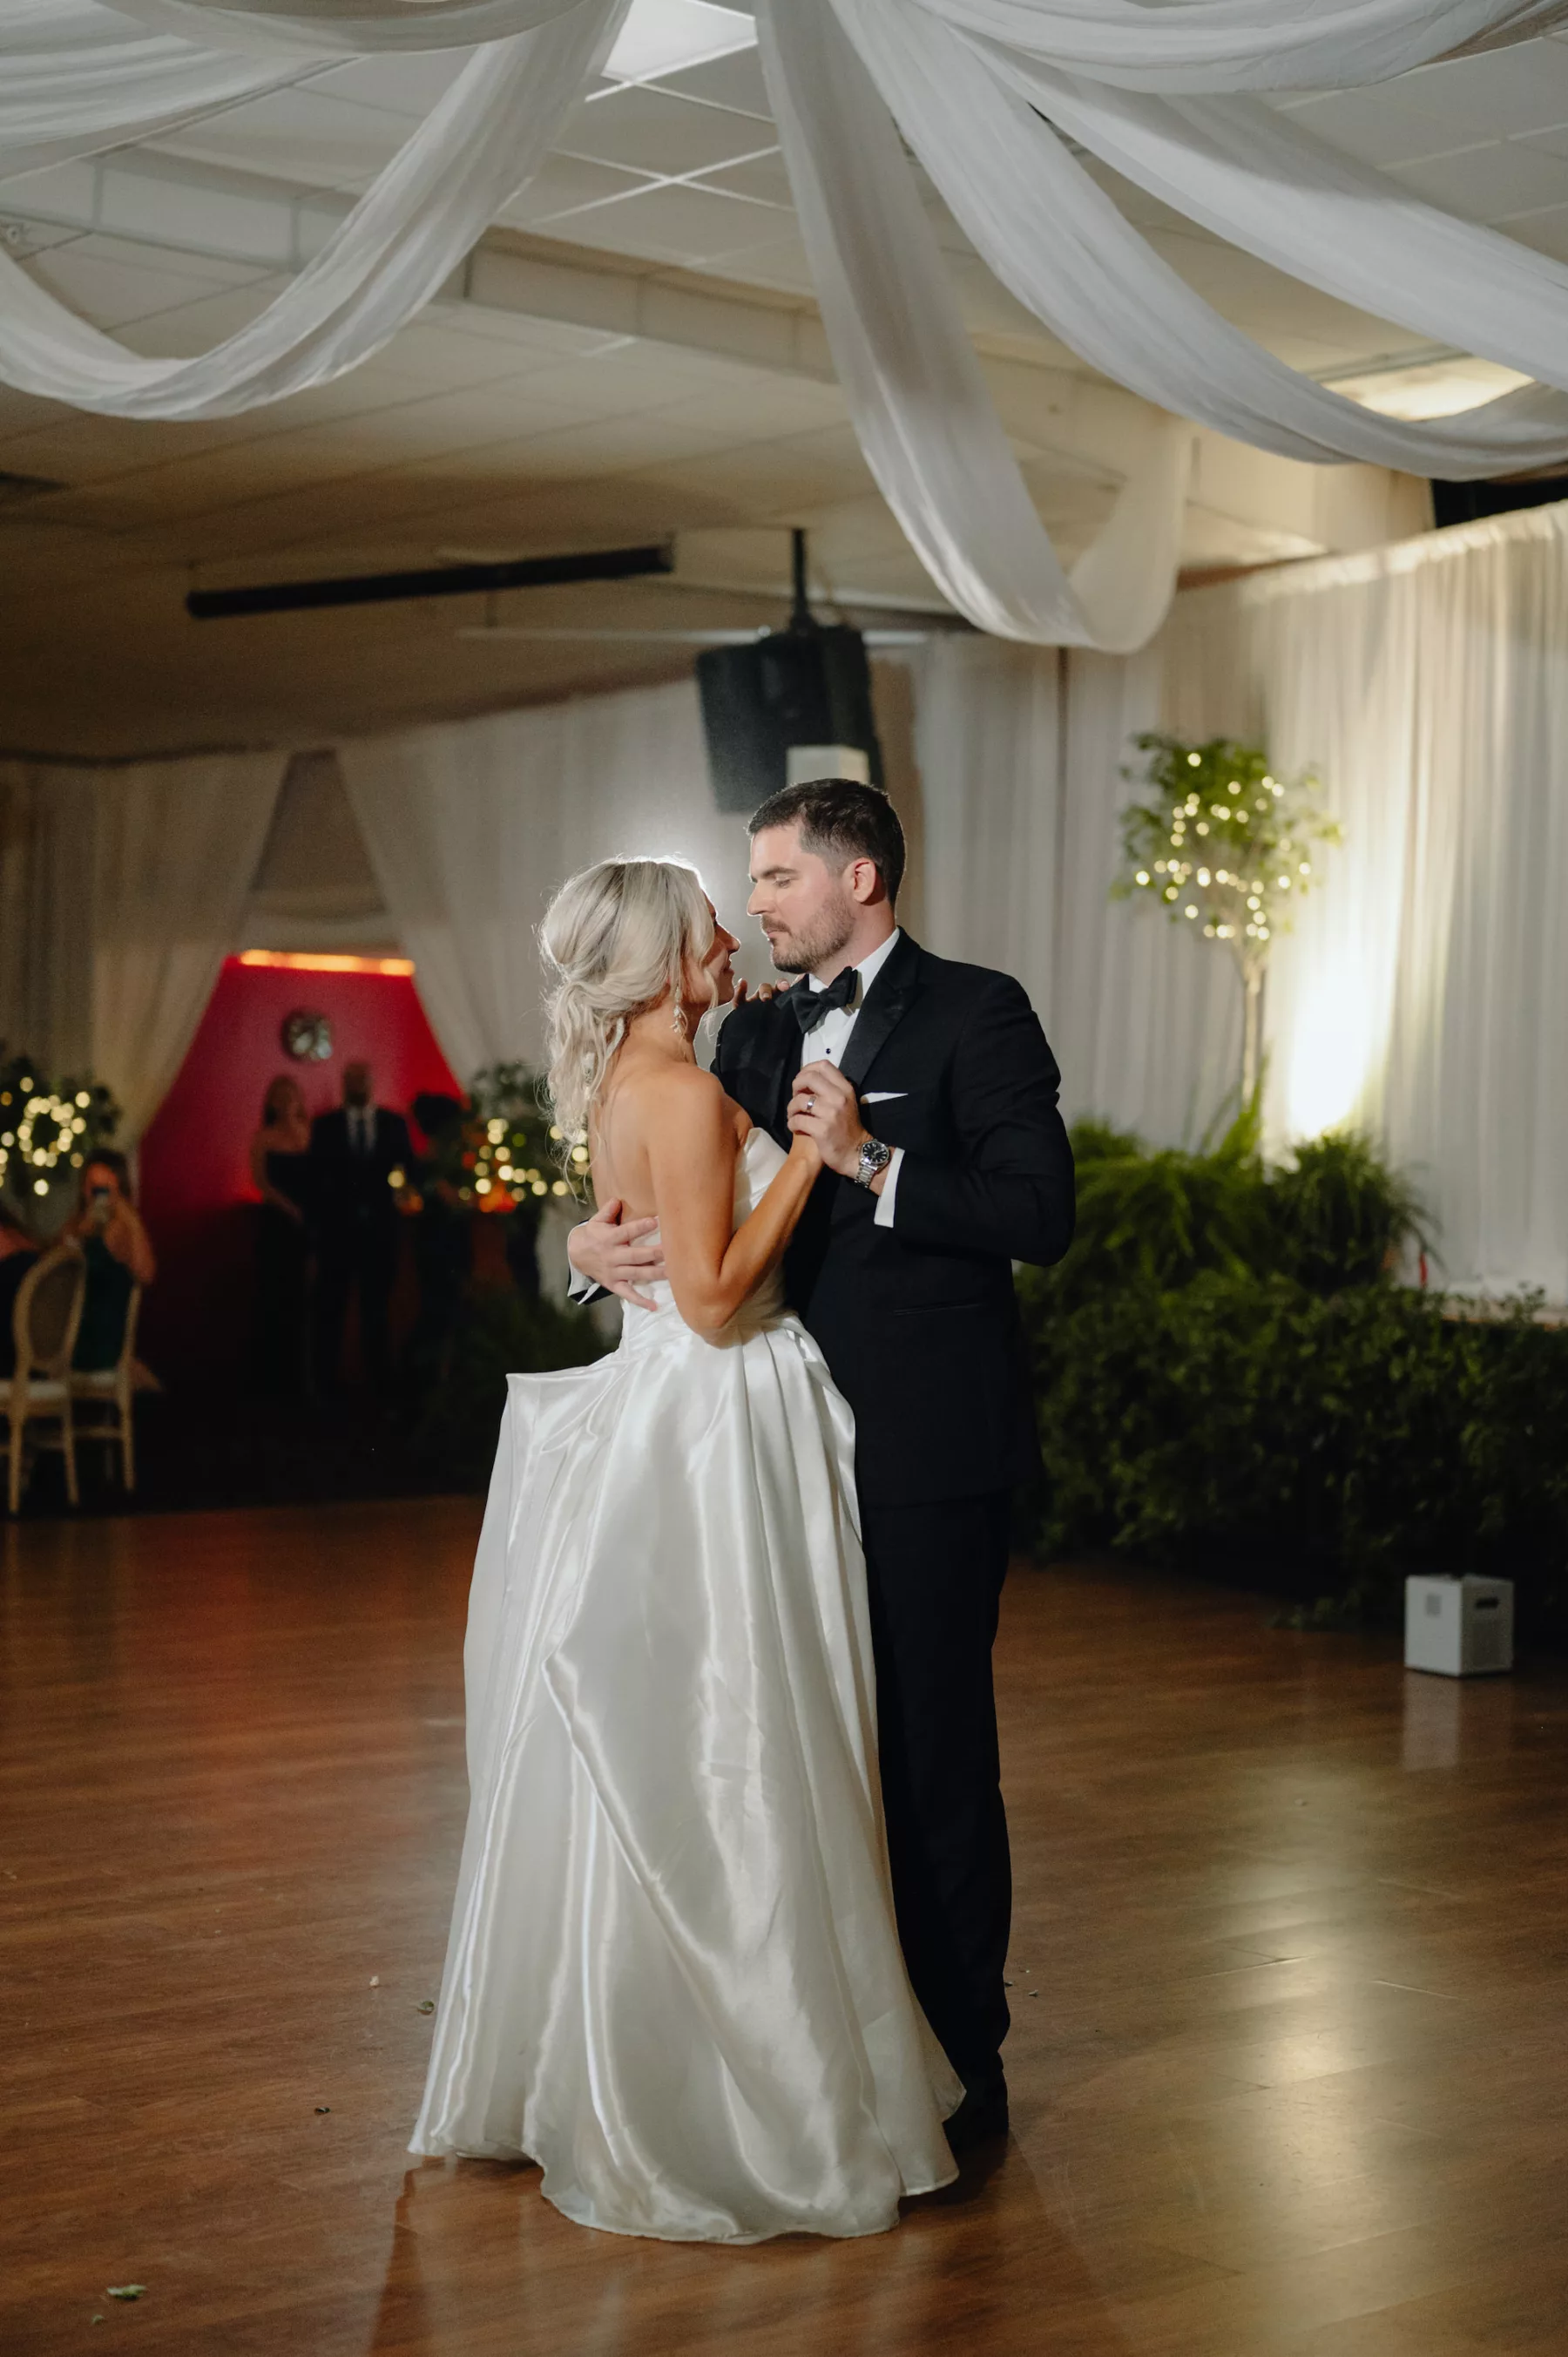 Bride and Groom Private Last Dance Wedding Portrait with Cold Spark Machine | Tampa Bay Content Creator Behind The Vows